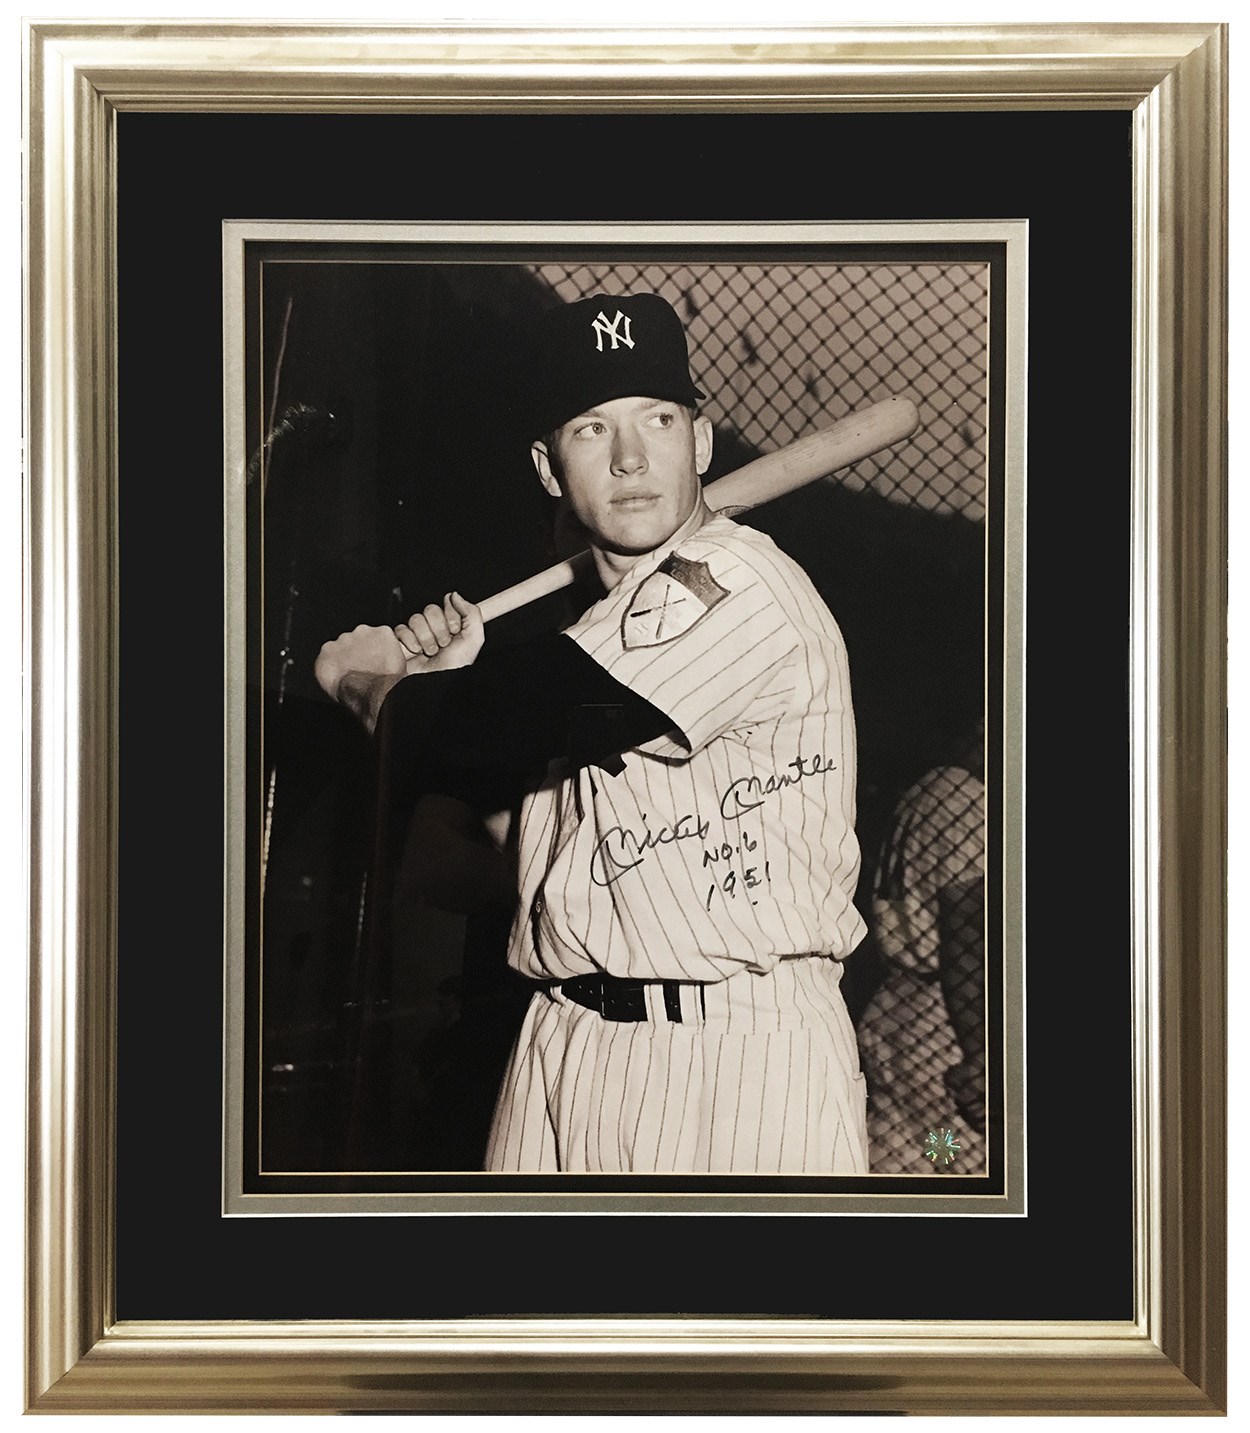 Mantle and Maris - Mickey Mantle Signed "No. 6, 1951" Oversized Rookie Photograph